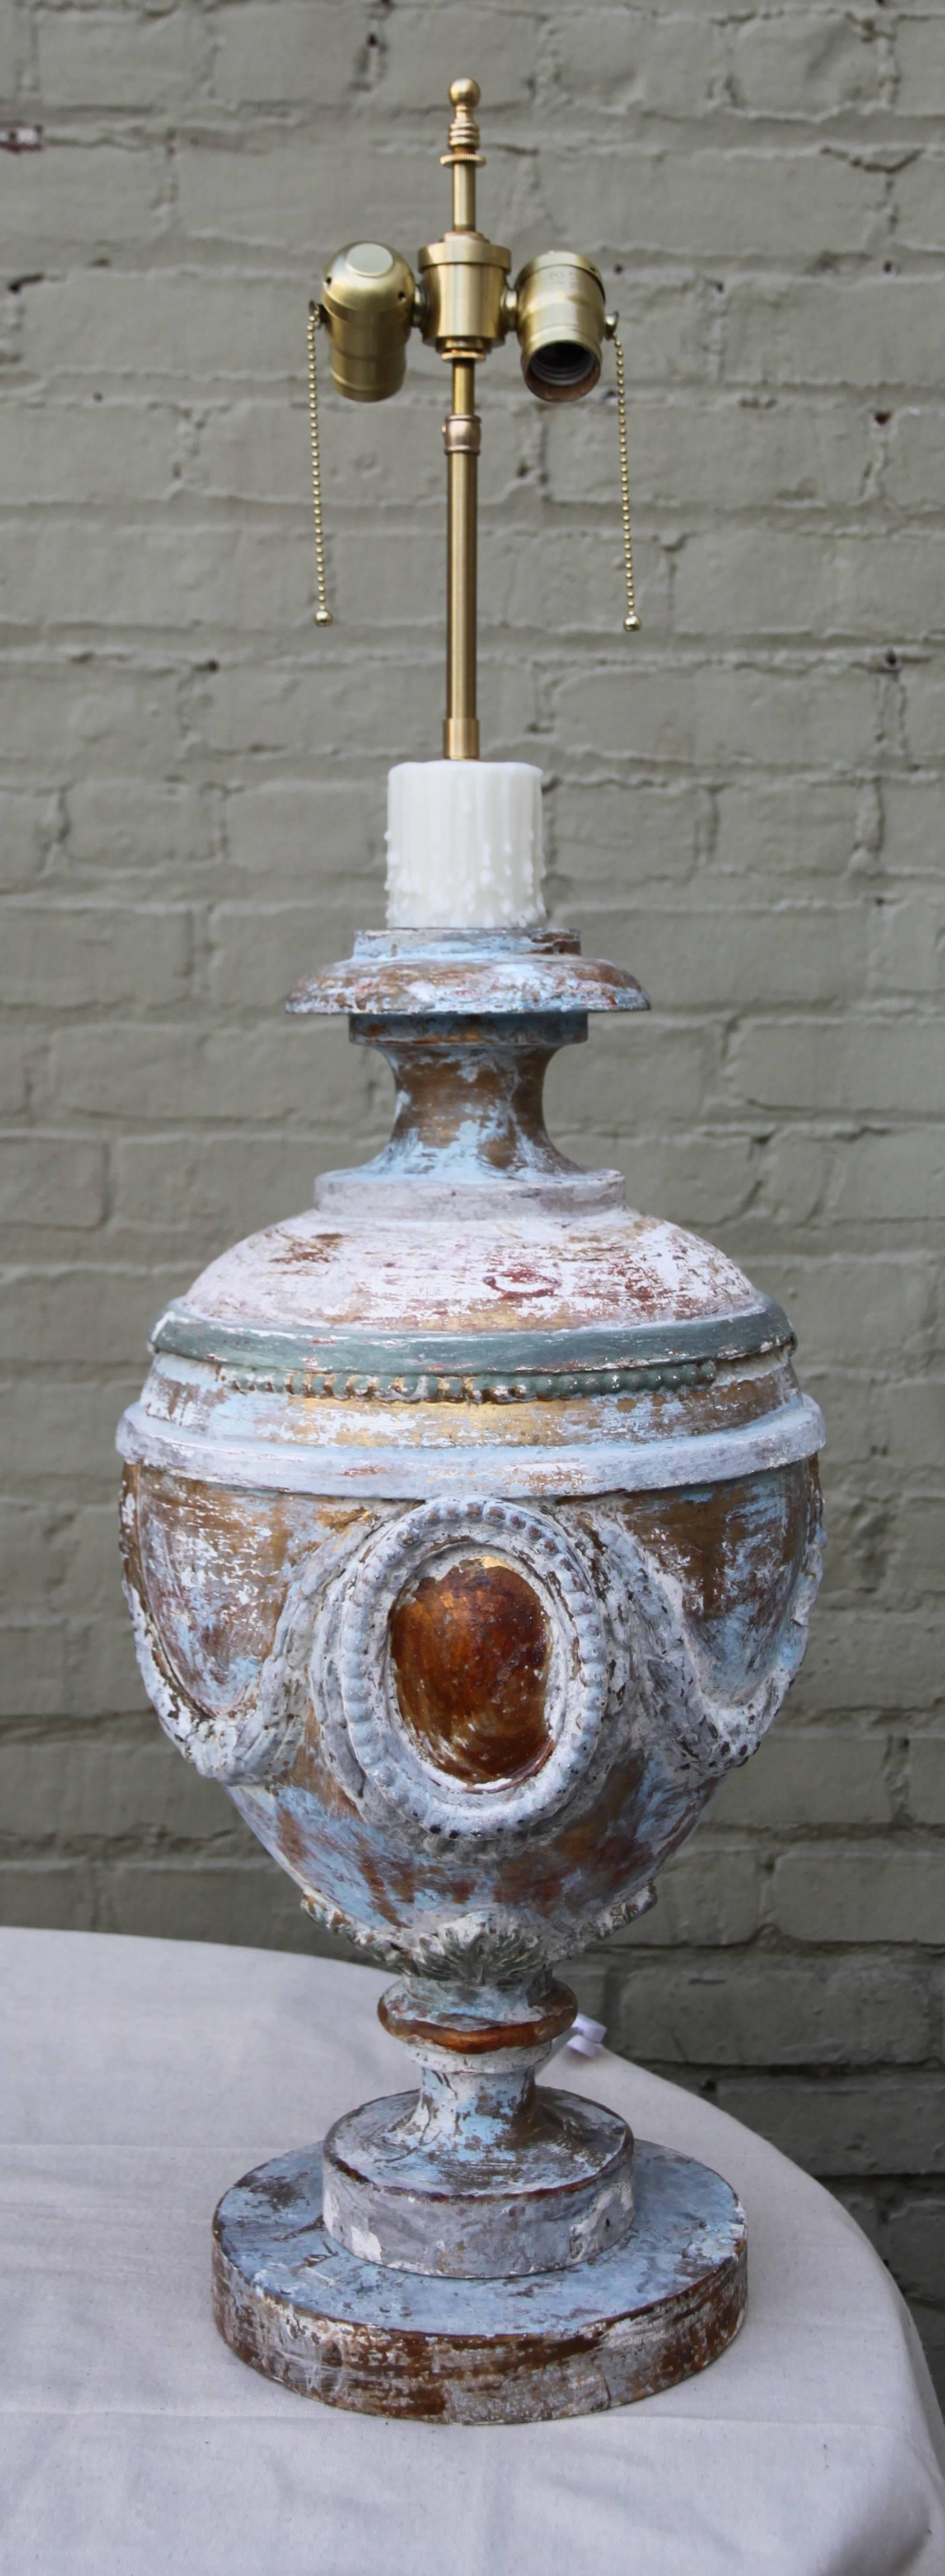 Pair of 19th century Italian urns wired into lamps and crowned with custom-made hand-painted parchment shades. Shade size: 12.5